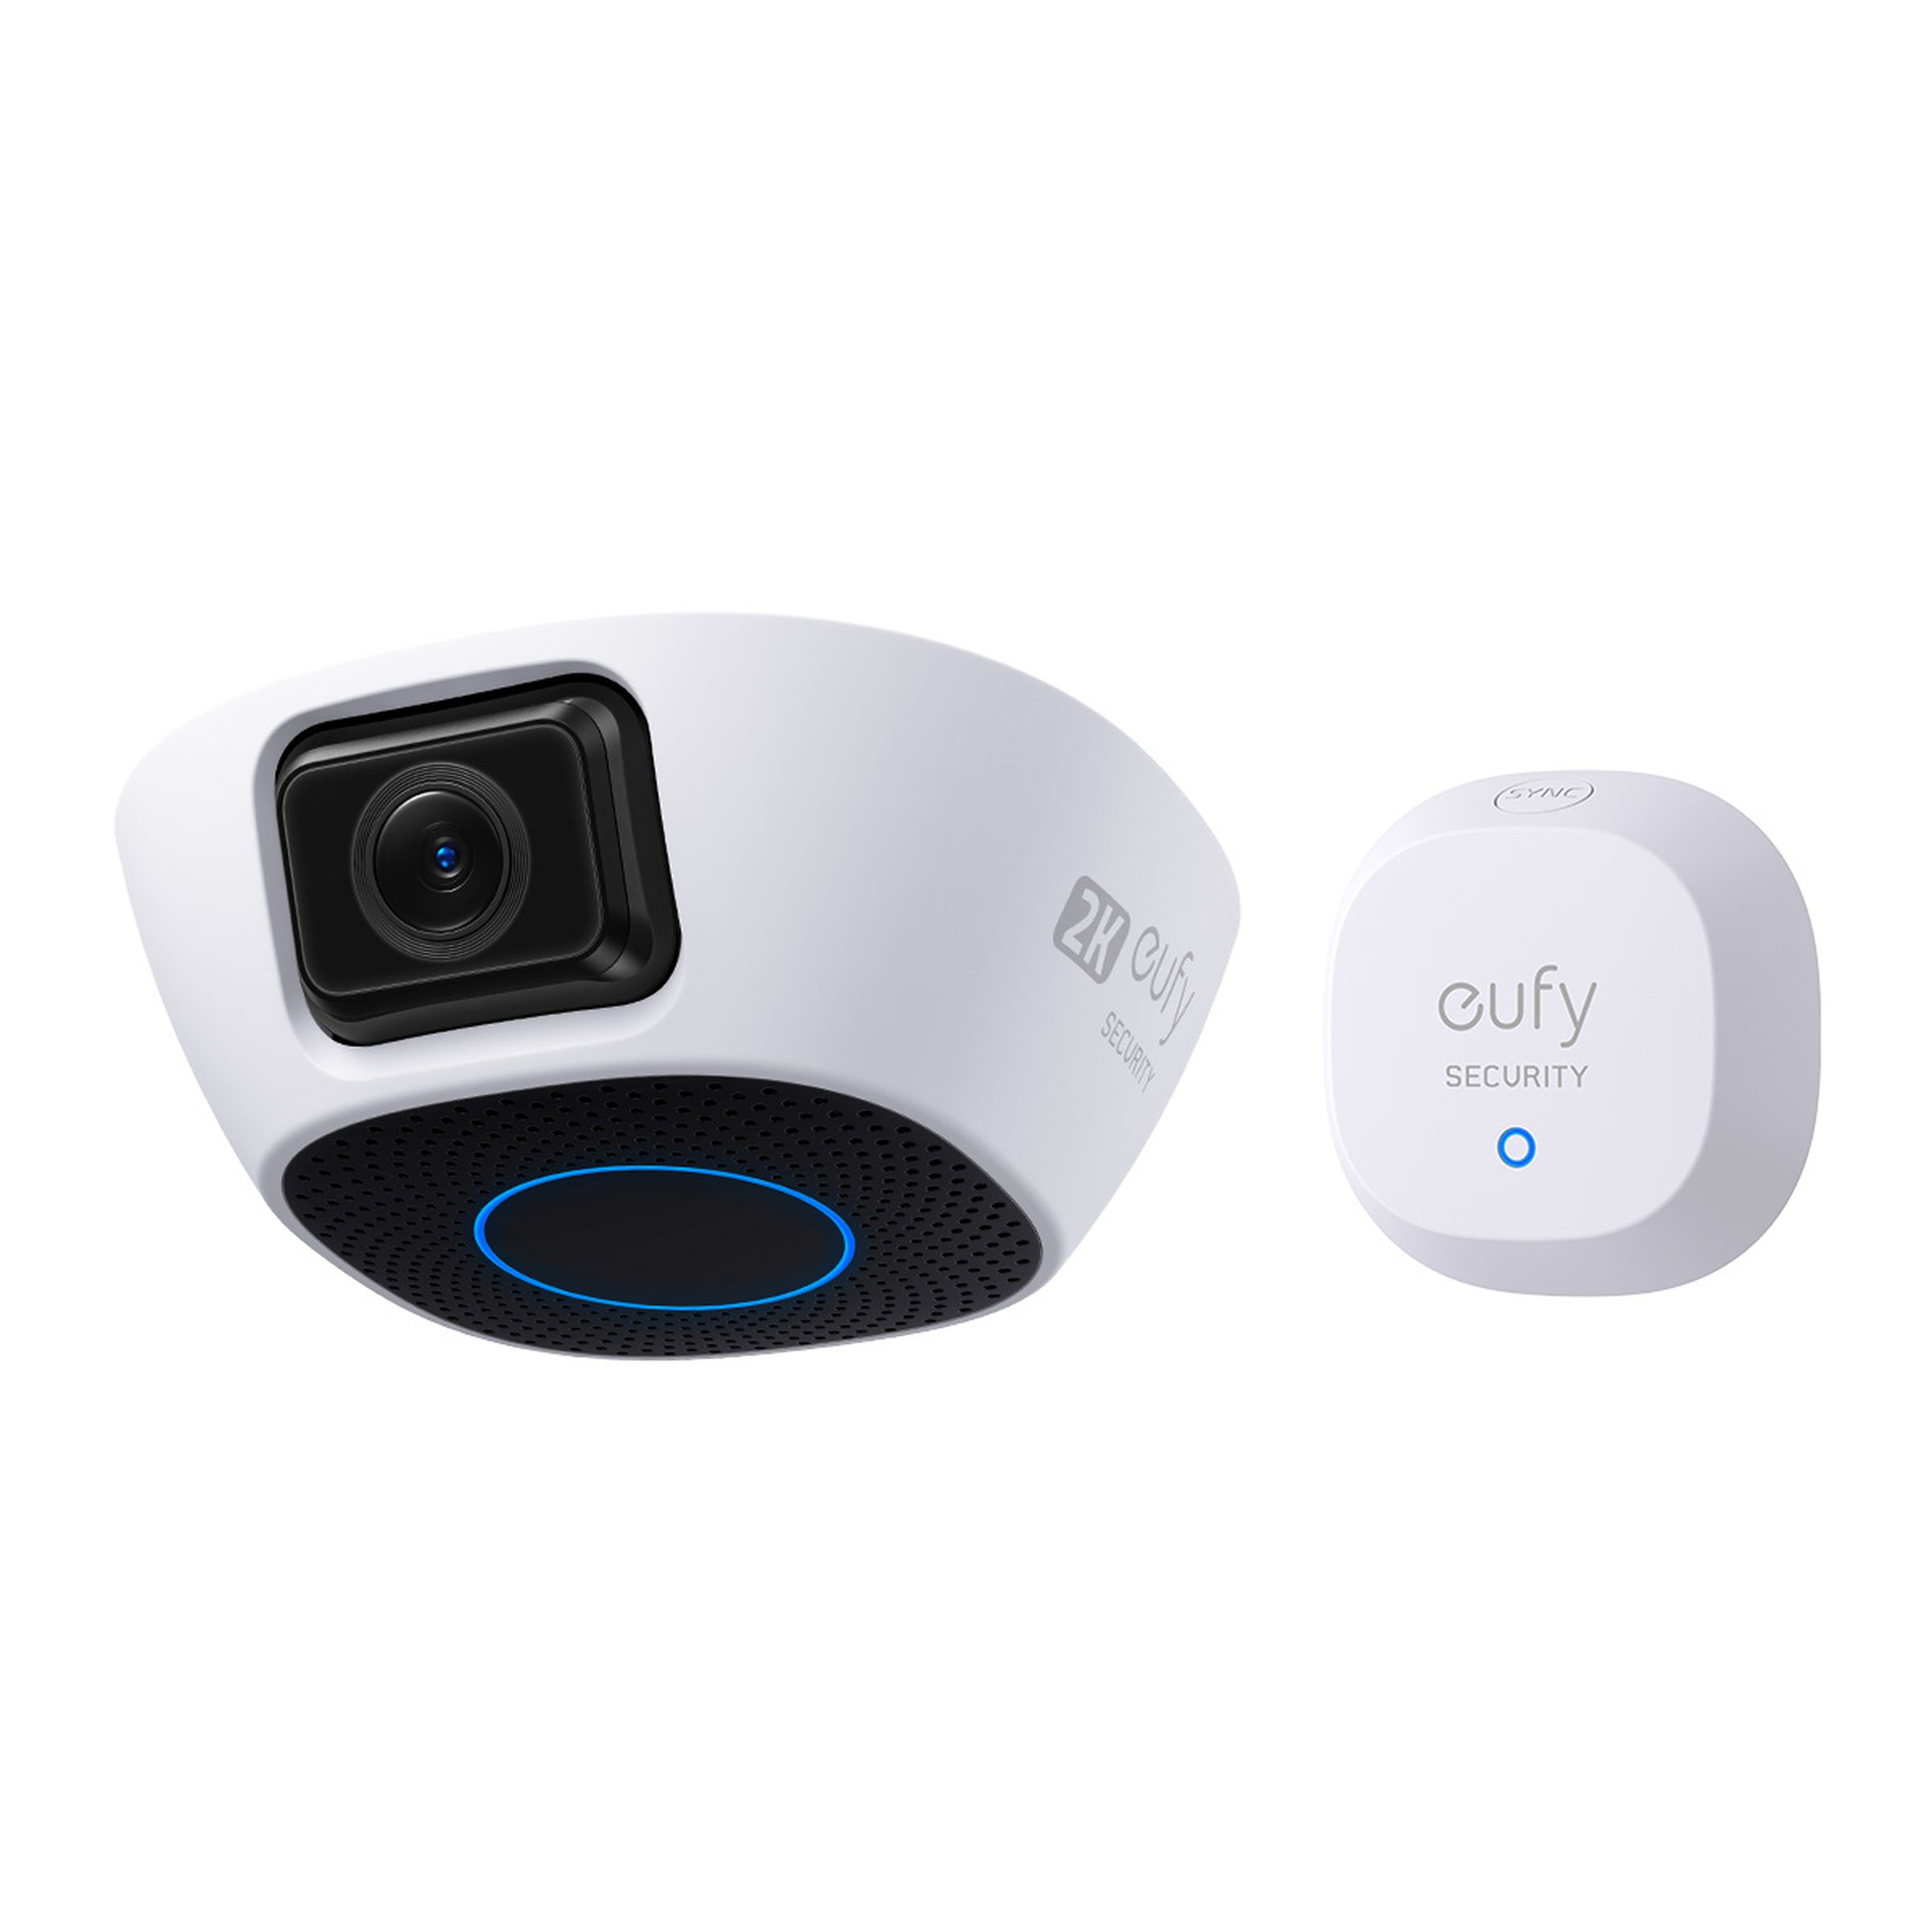 The Garage-Control Cam combines a garage door controller and camera into one device.